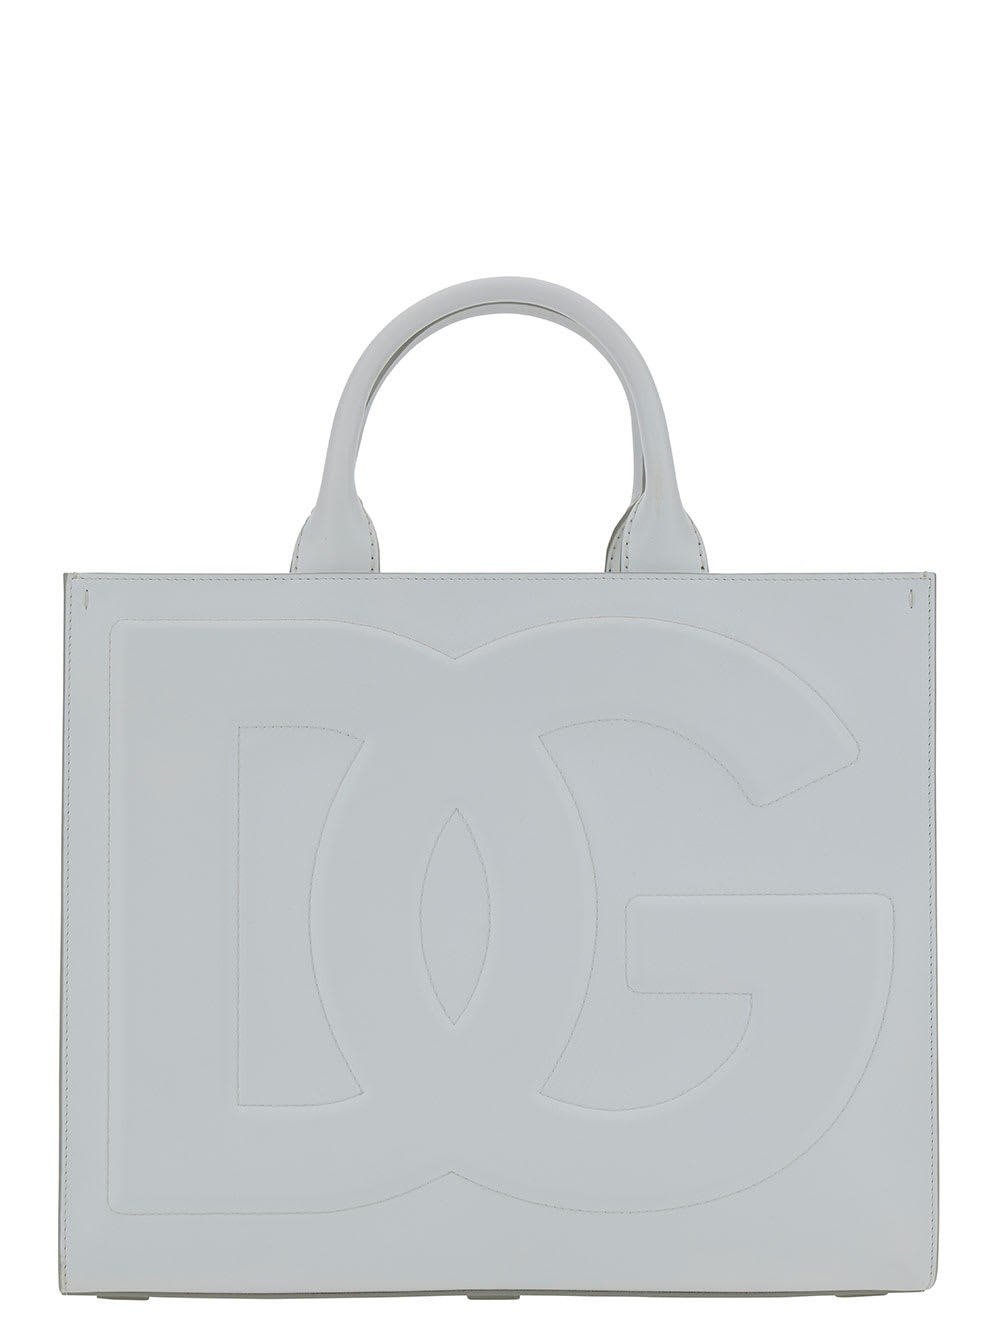 DOLCE & GABBANA WHITE HANDBAG WITH TONAL DG DETAIL IN SMOOTH LEATHER WOMAN